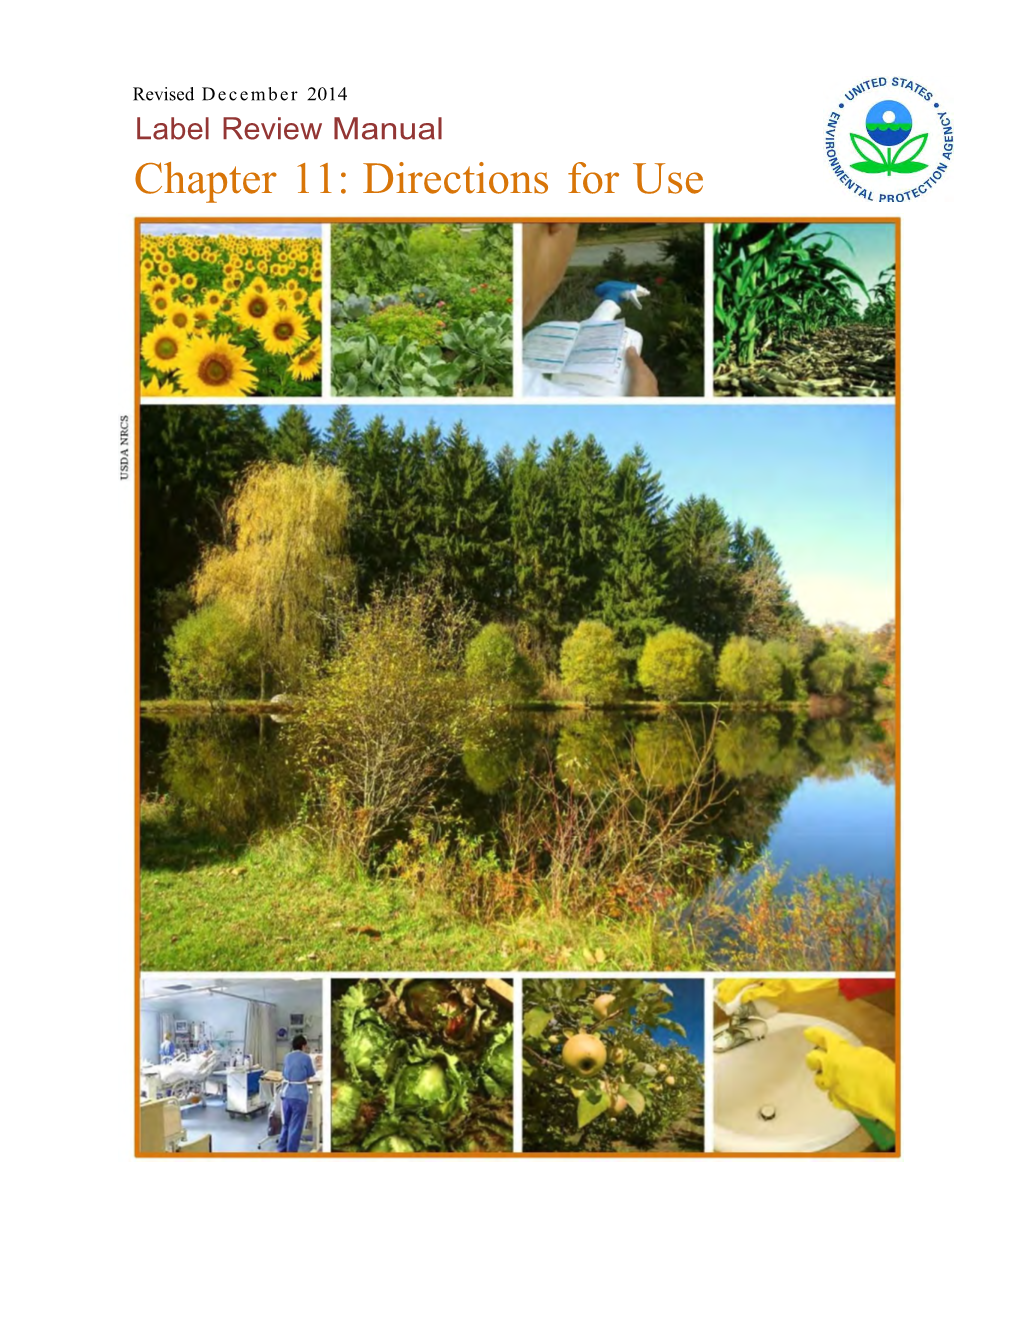 Label Review Manual Chapter 11: Directions for Use